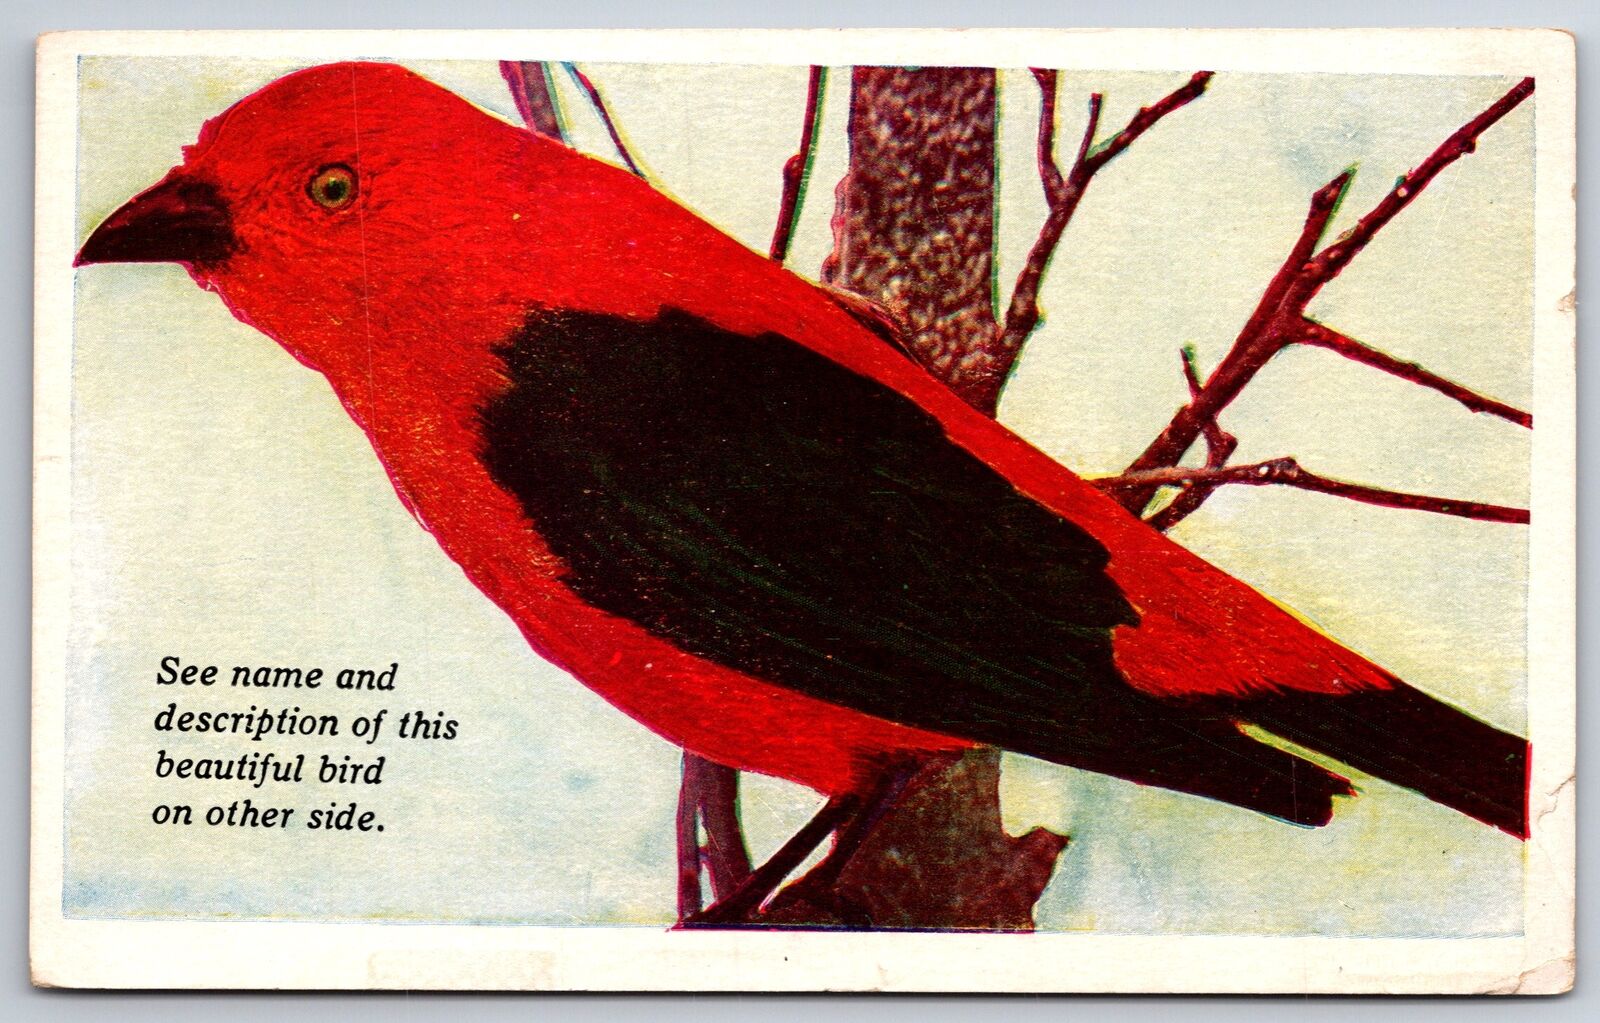 Animals~Closeup View Of Scarlet Tanager Bird Perched On Branch~Vintage Postcard